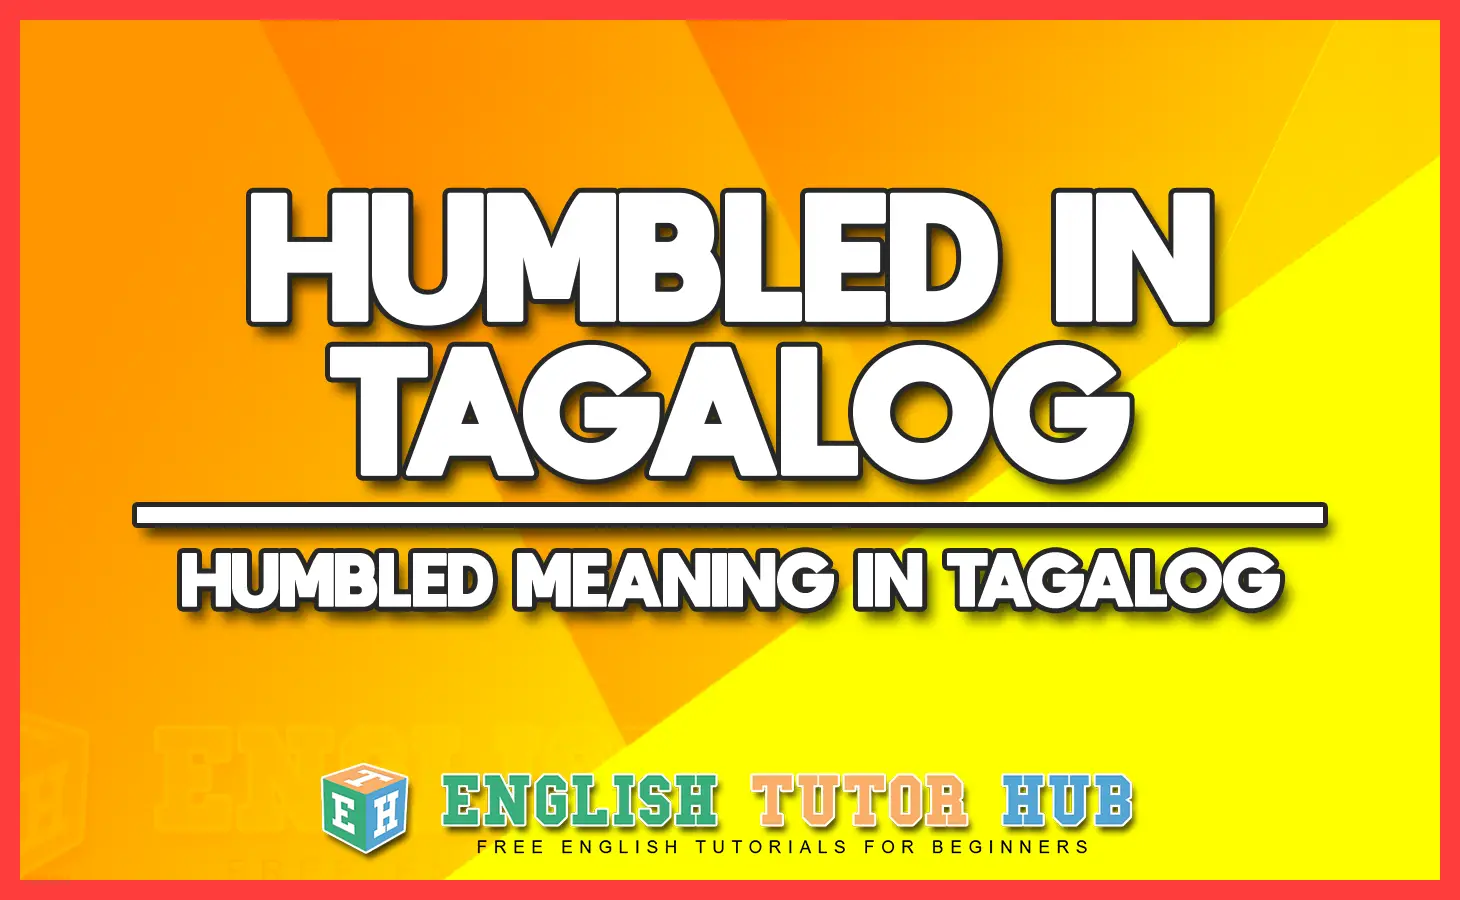 HUMBLED IN TAGALOG - HUMBLED MEANING IN TAGALOG